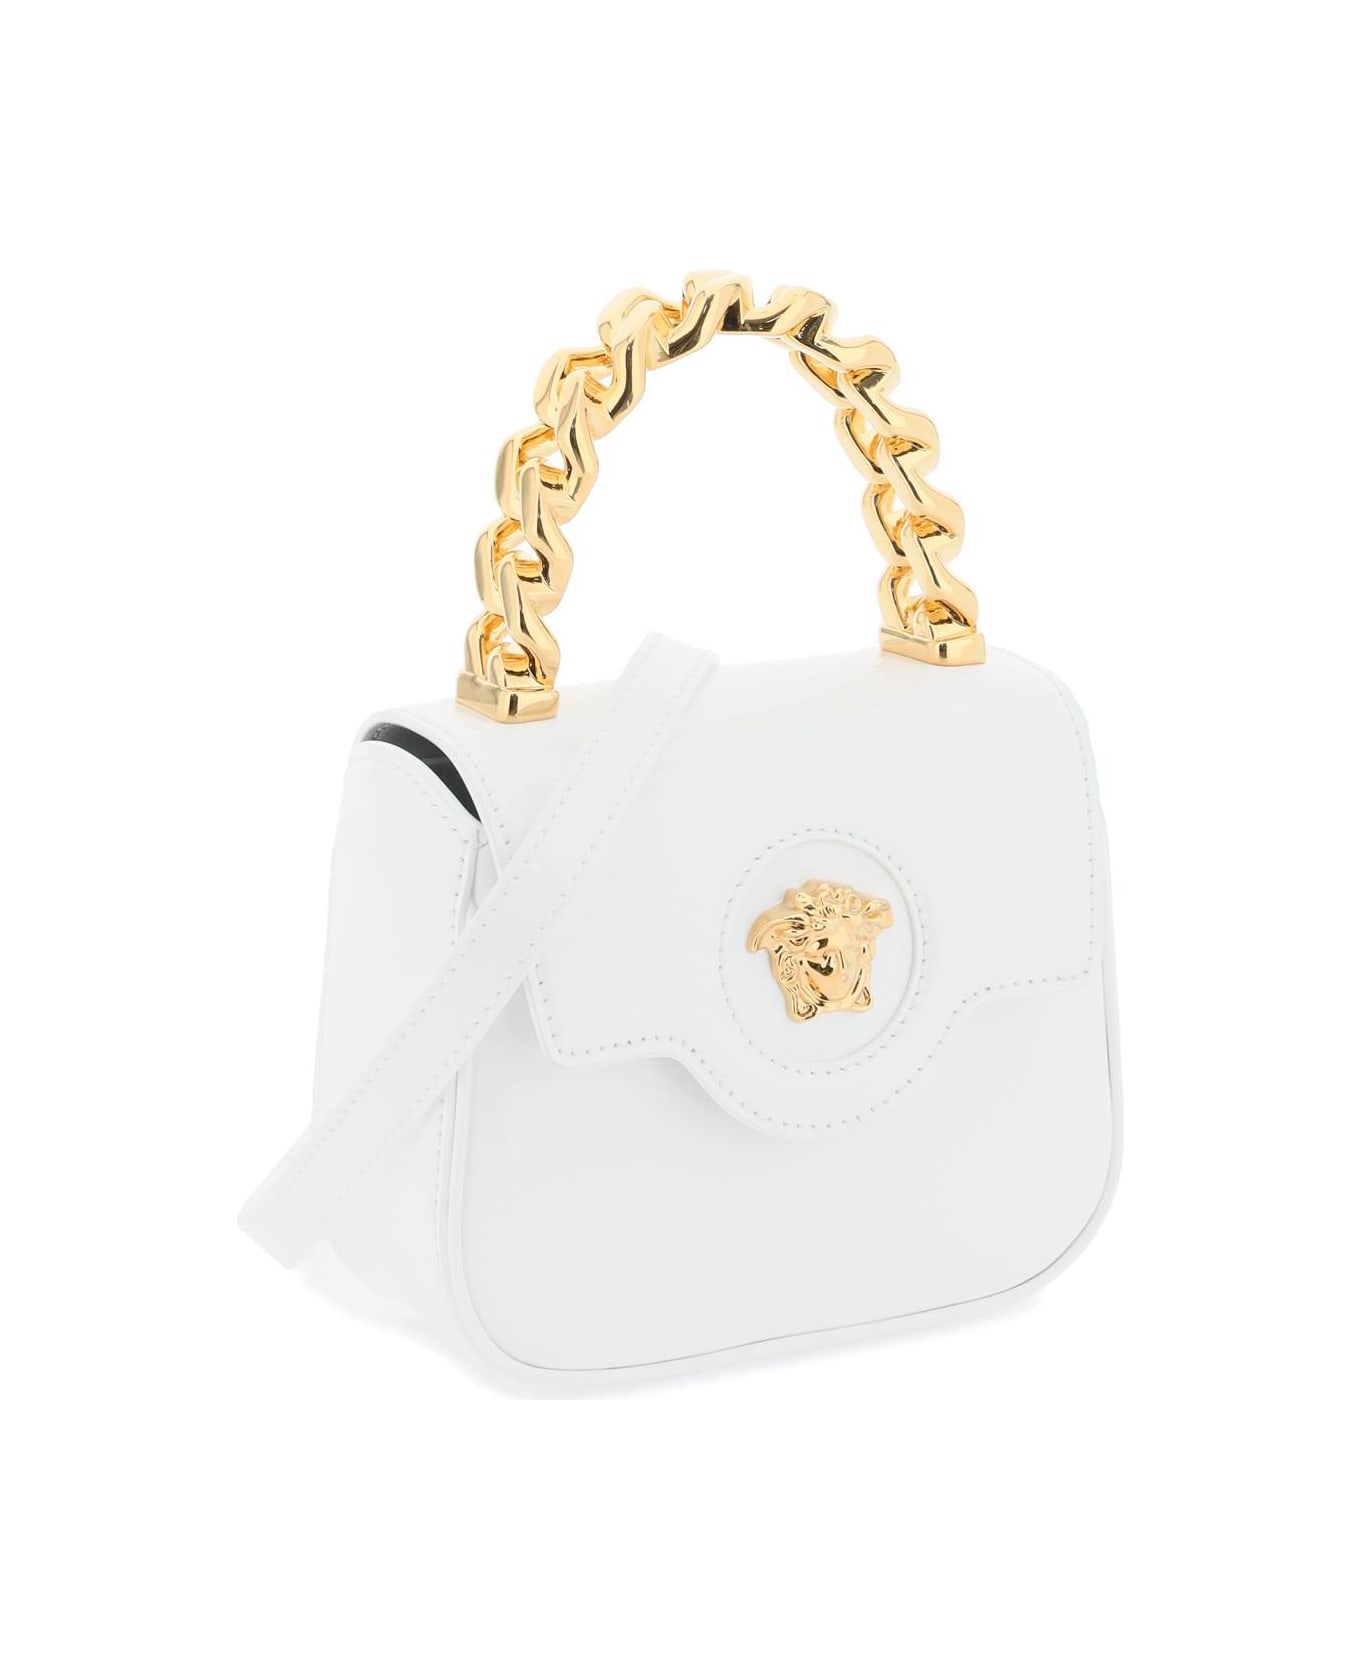 Versace White Patent Leather Bag - OPTICAL WHITE VERSACE GOL (White) トートバッグ